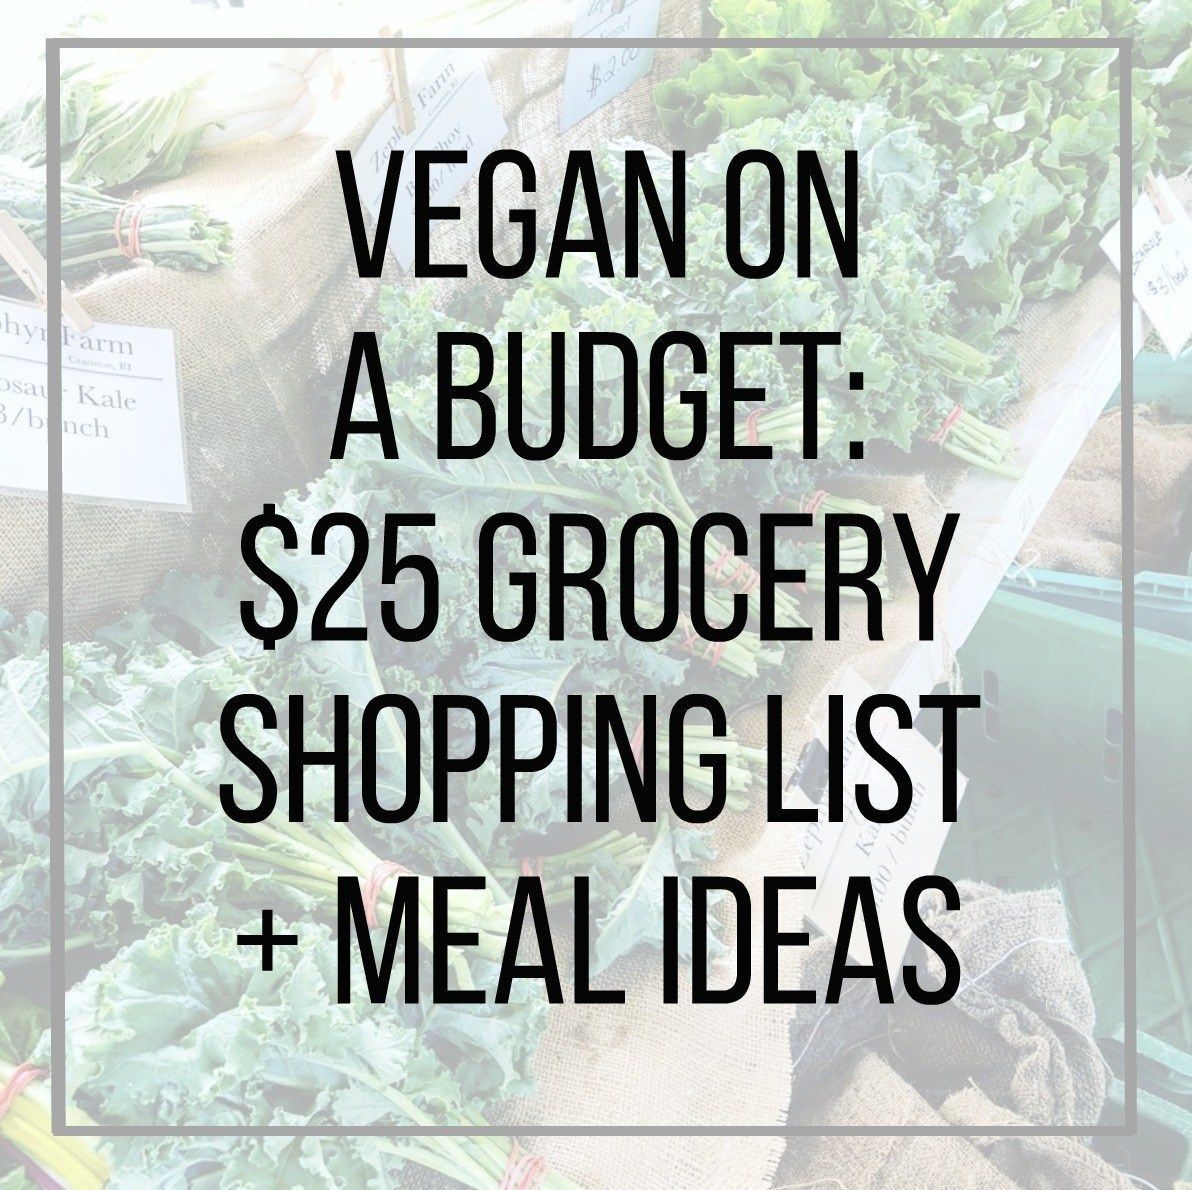 Vegan on a Budget: $25 Grocery Shopping List + Meal Ideas | The Friendly Fig -   14 healthy recipes On A Budget cleanses ideas